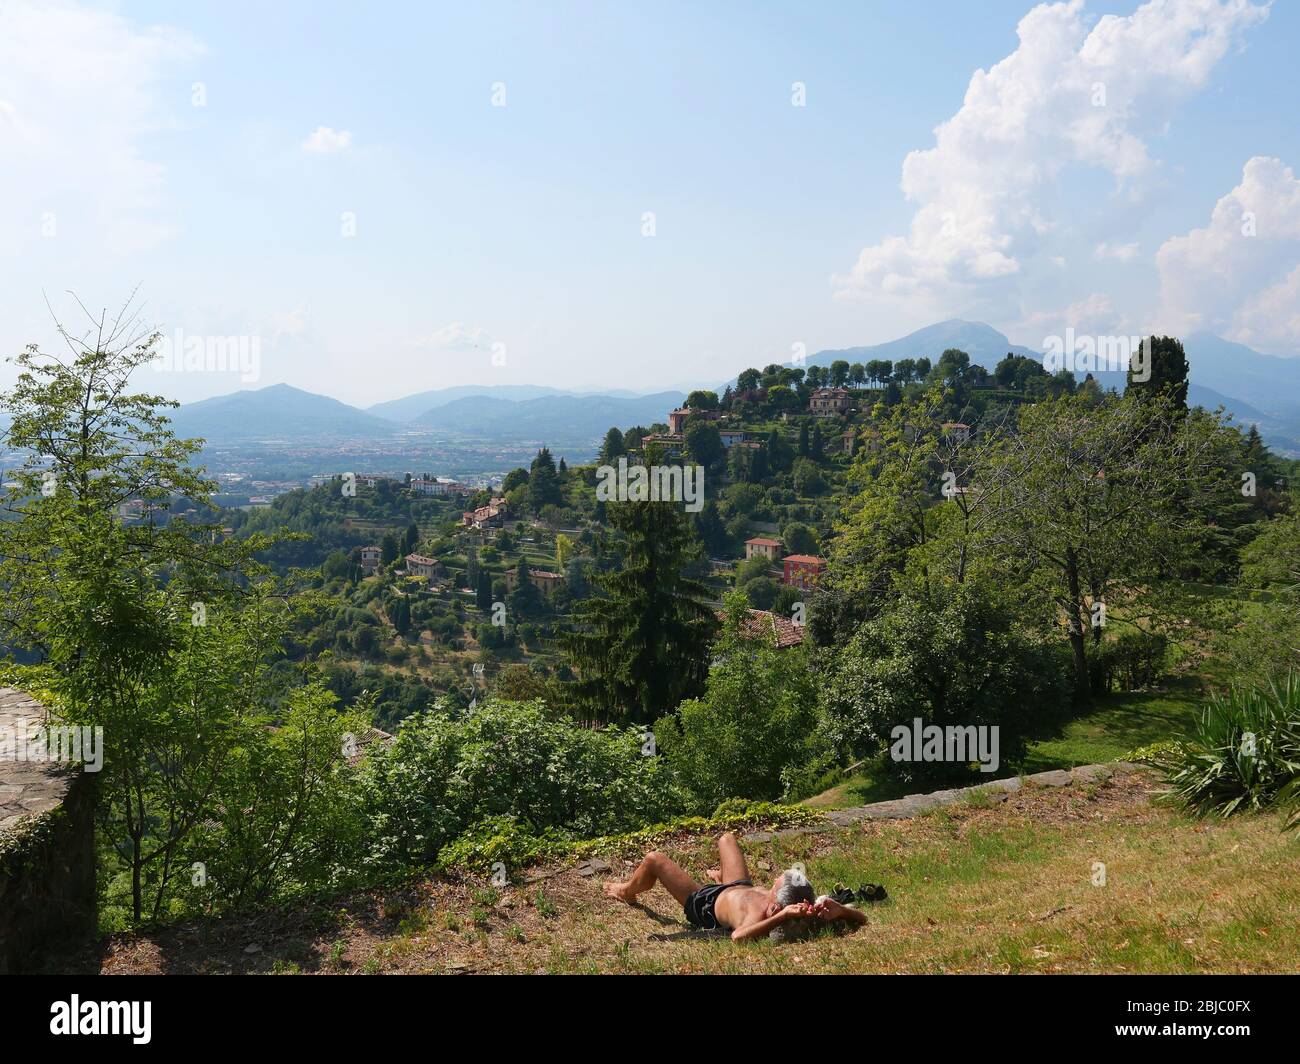 A man sunbathing with beautiful view of small town in lush green valley Stock Photo